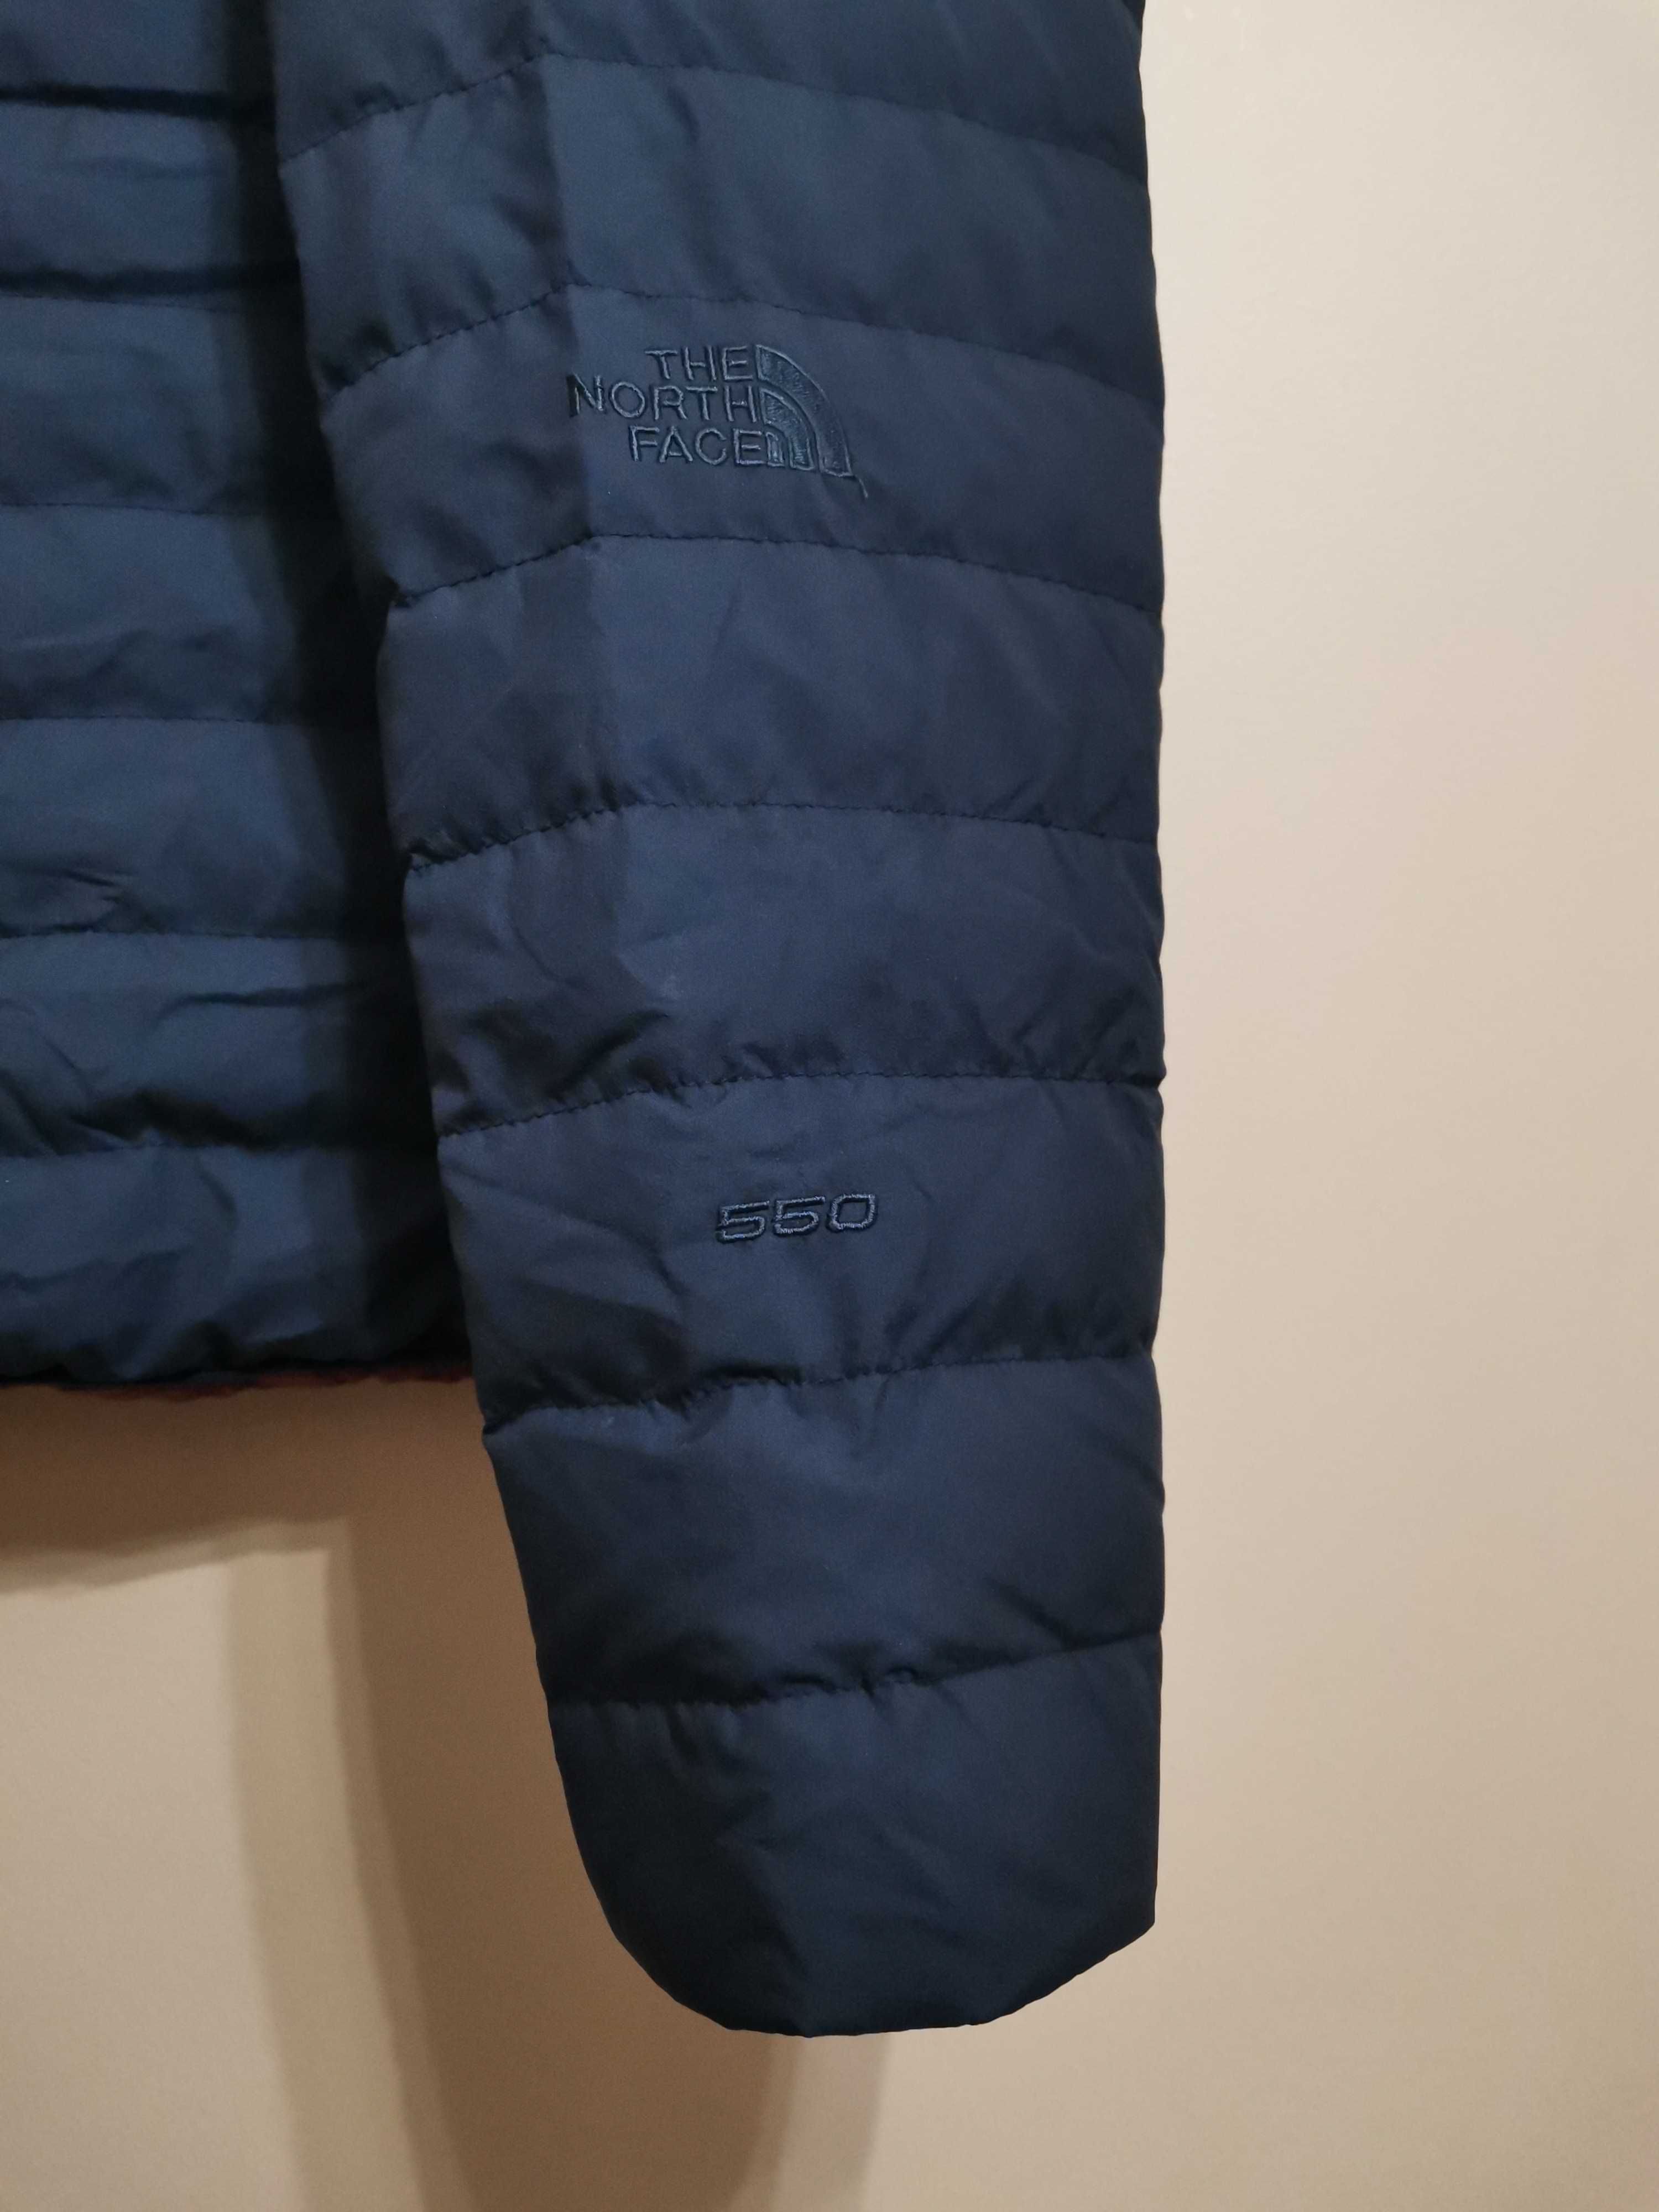 The North Face 550 Gore Windstopper Jacket.